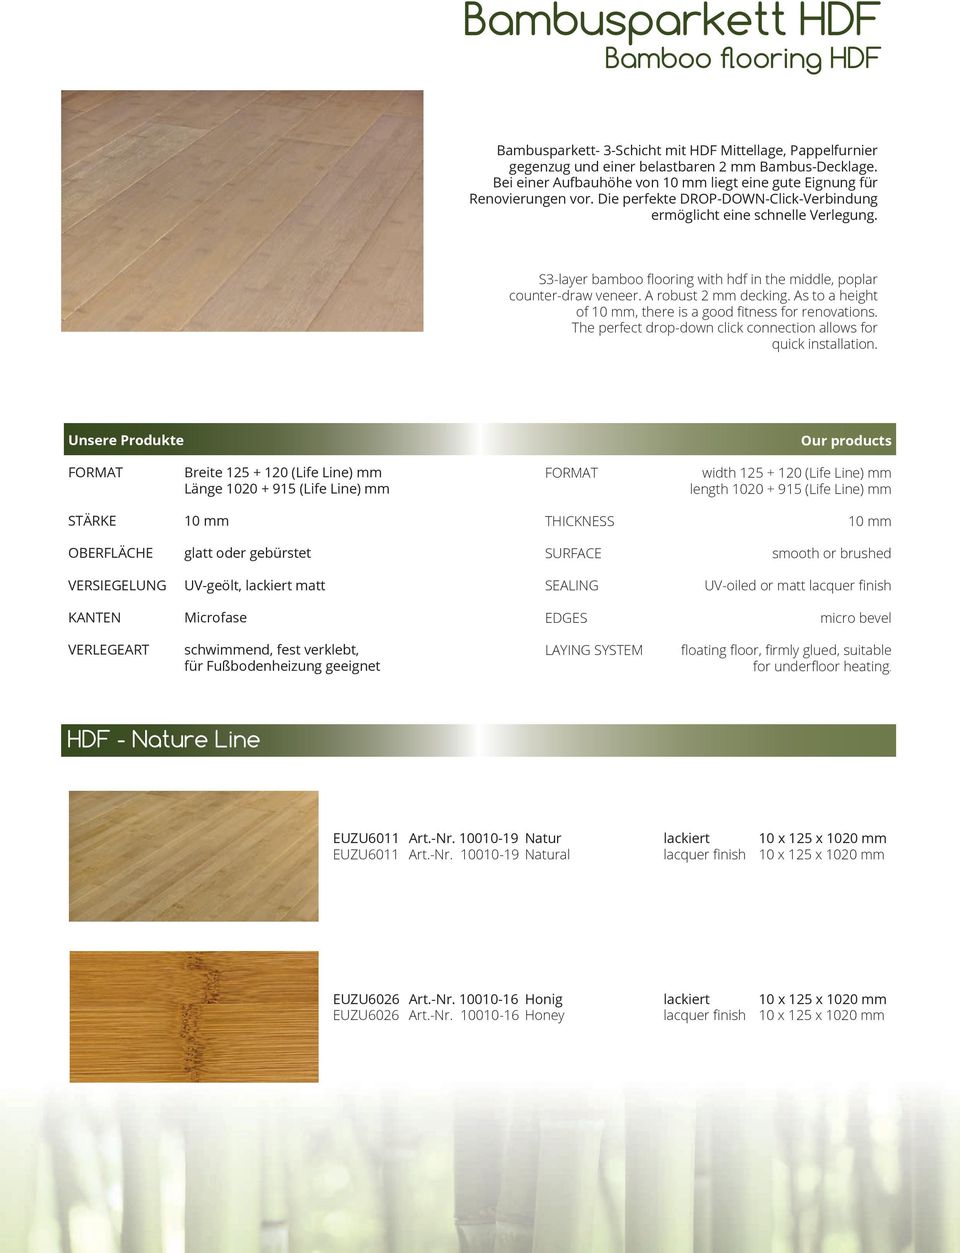 S3-layer bamboo flooring with hdf in the middle, poplar counter-draw veneer. A robust 2 mm decking. As to a height of 10 mm, there is a good fitness for renovations.